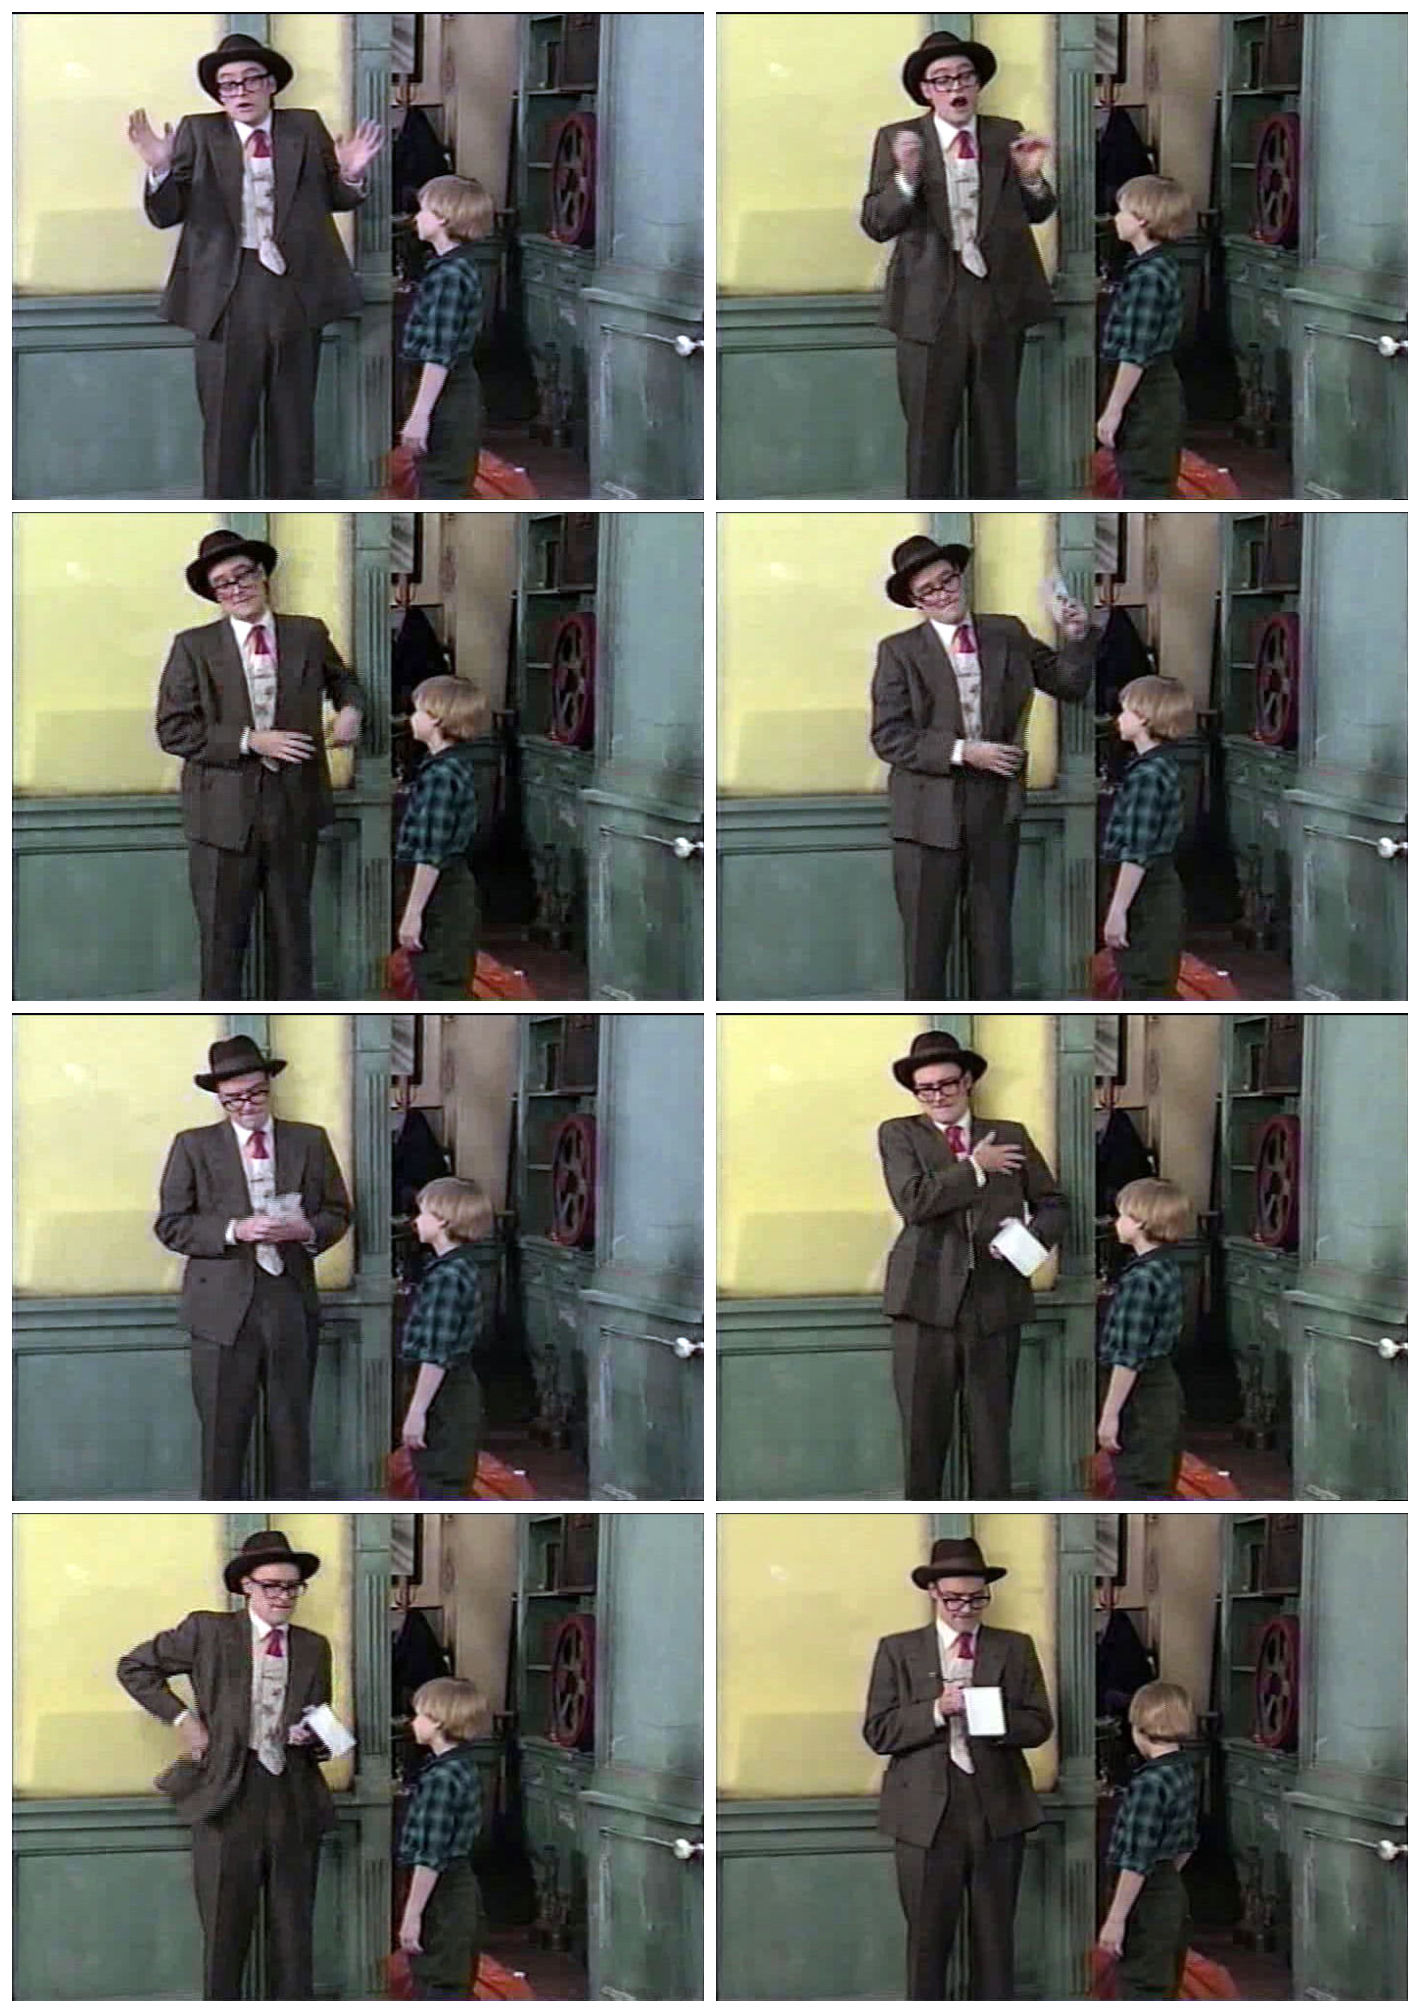 Shining Time Station 3.04 - Stacy Clears Up - Screen Captures 08
